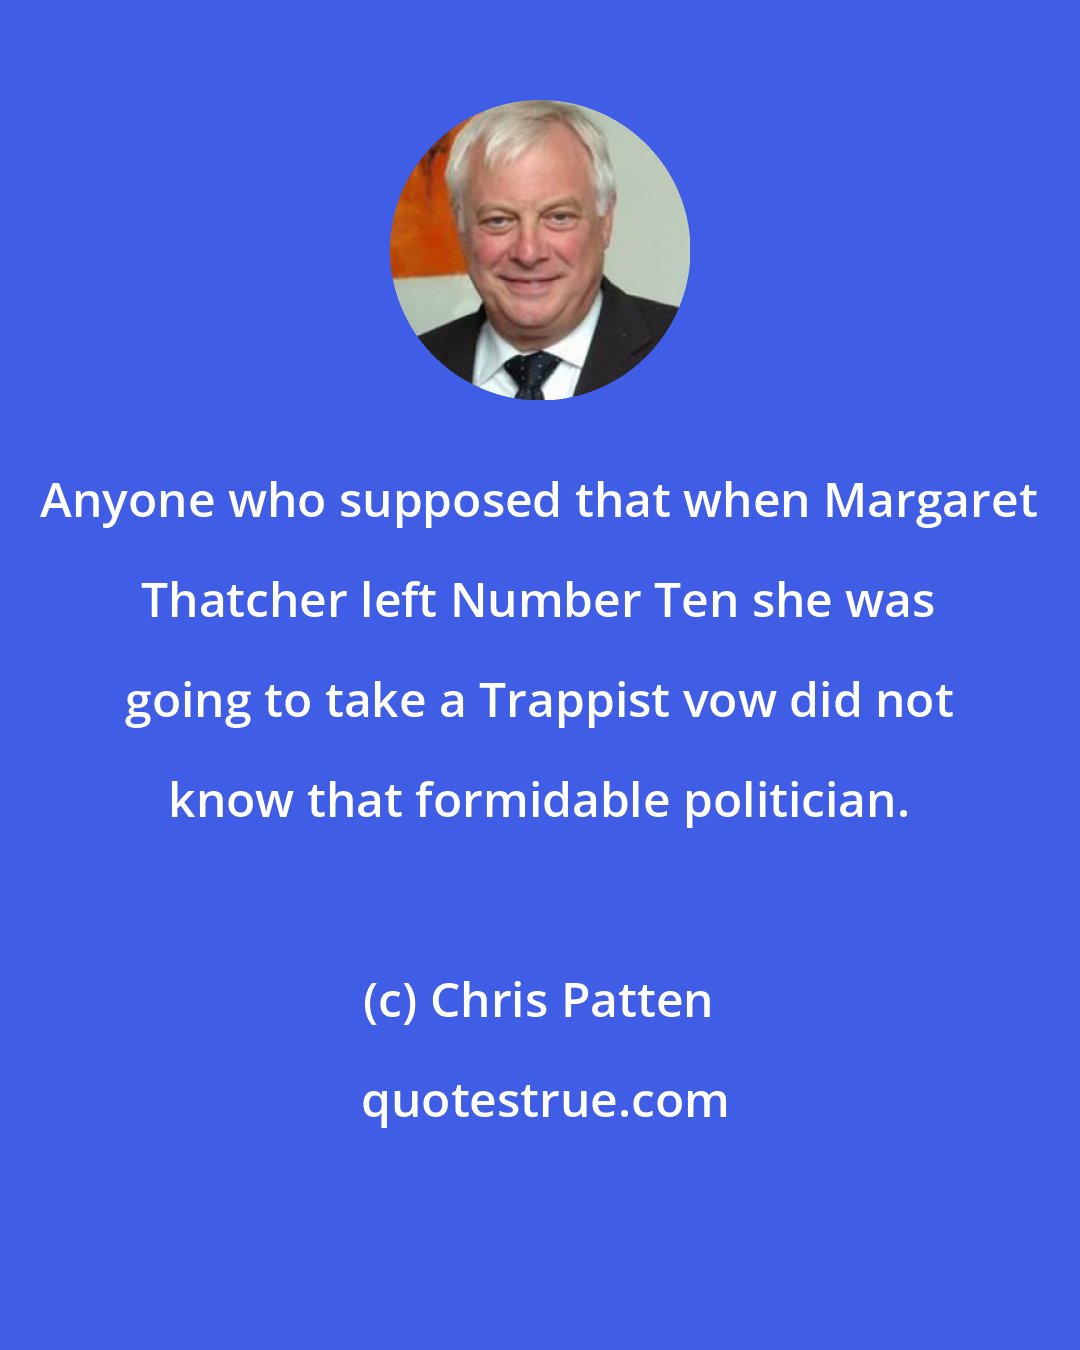 Chris Patten: Anyone who supposed that when Margaret Thatcher left Number Ten she was going to take a Trappist vow did not know that formidable politician.